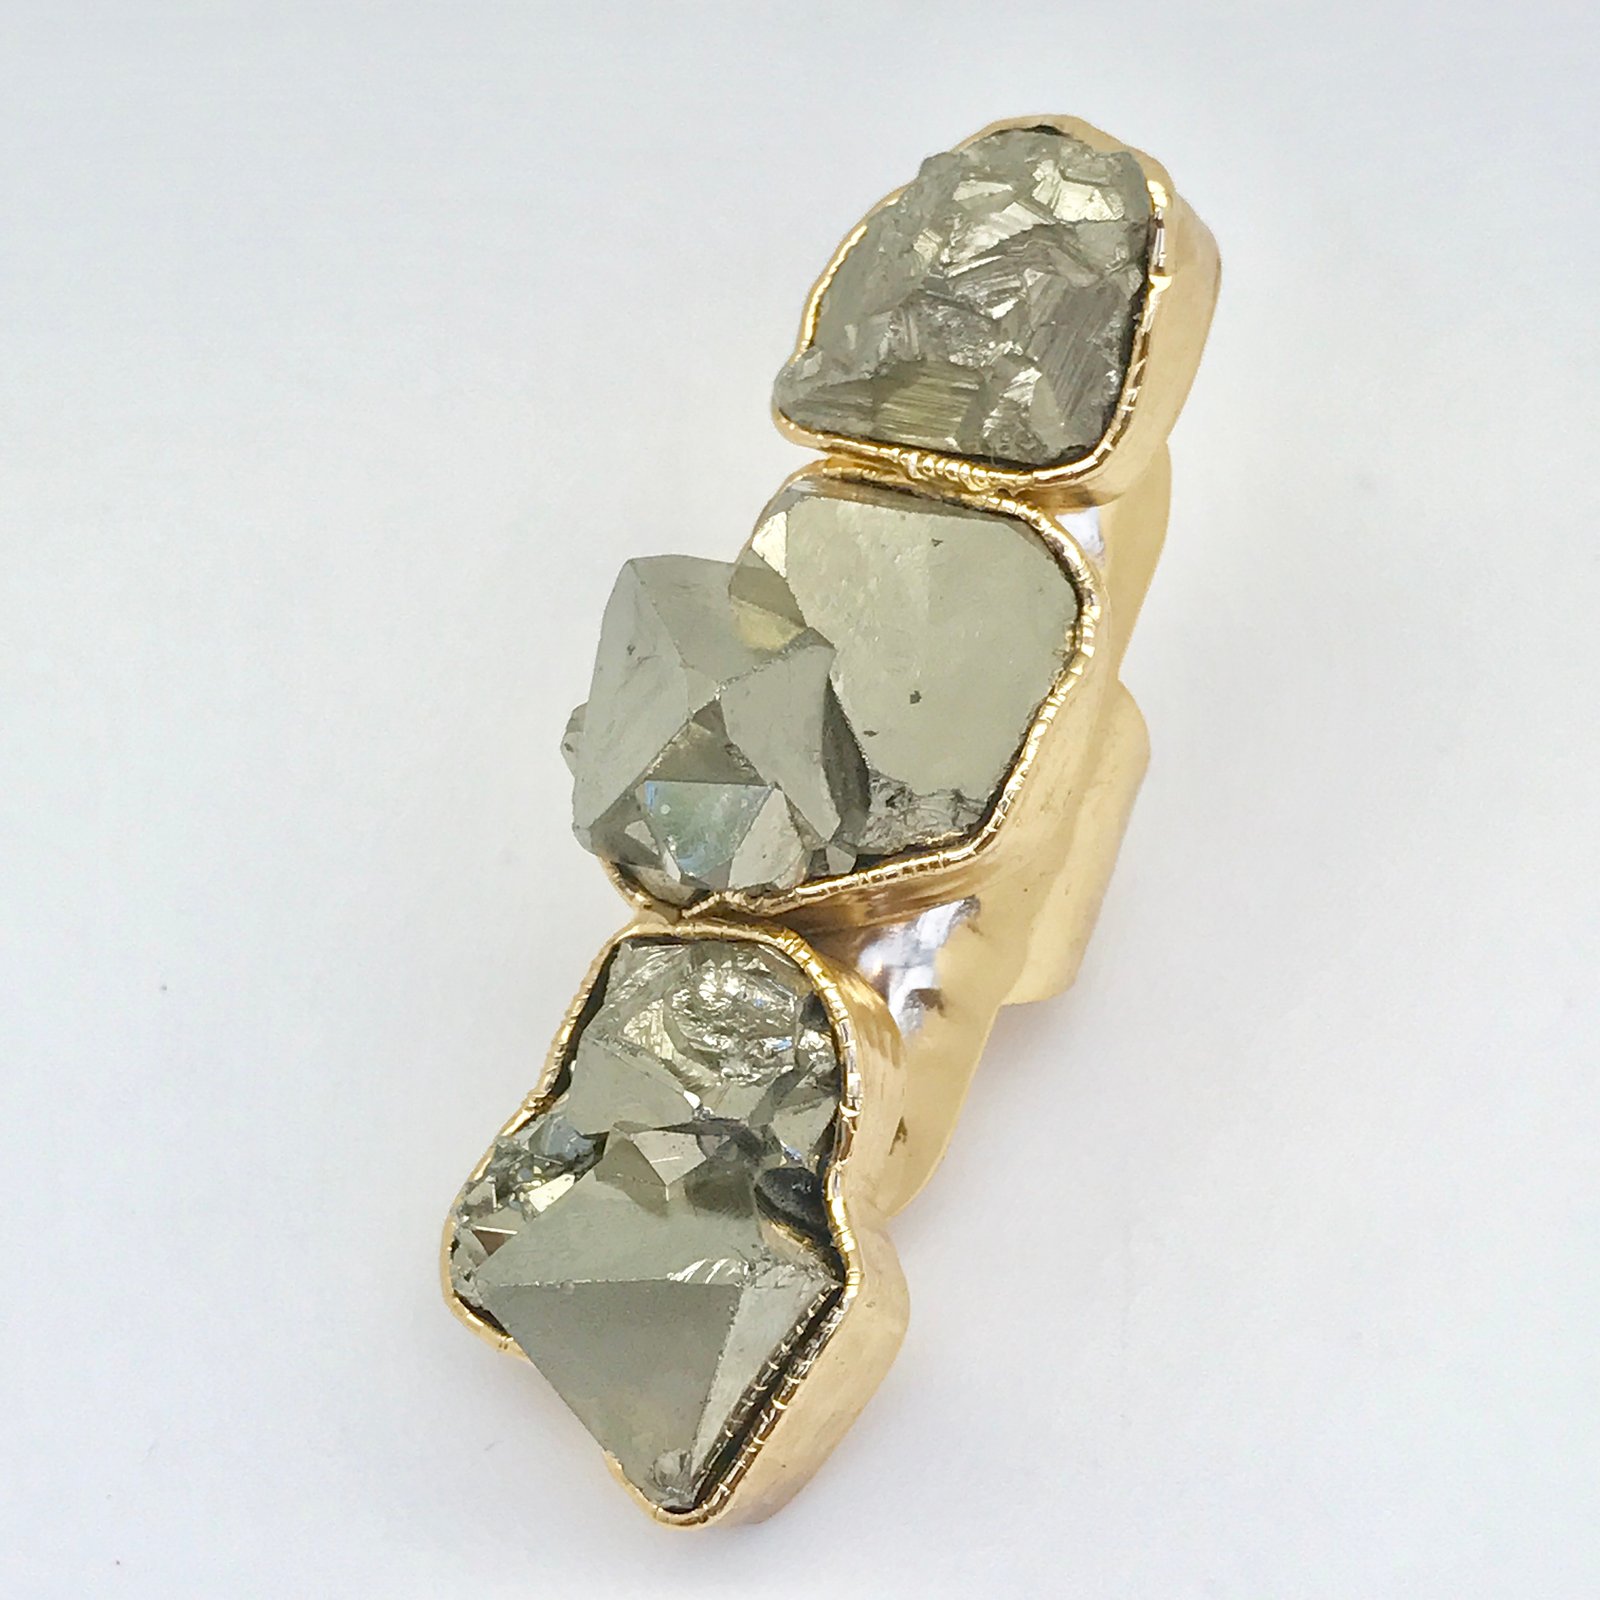 Anemone Jewelry Unique Pyrite Stone Ring in 14k Gold Plated | eBay